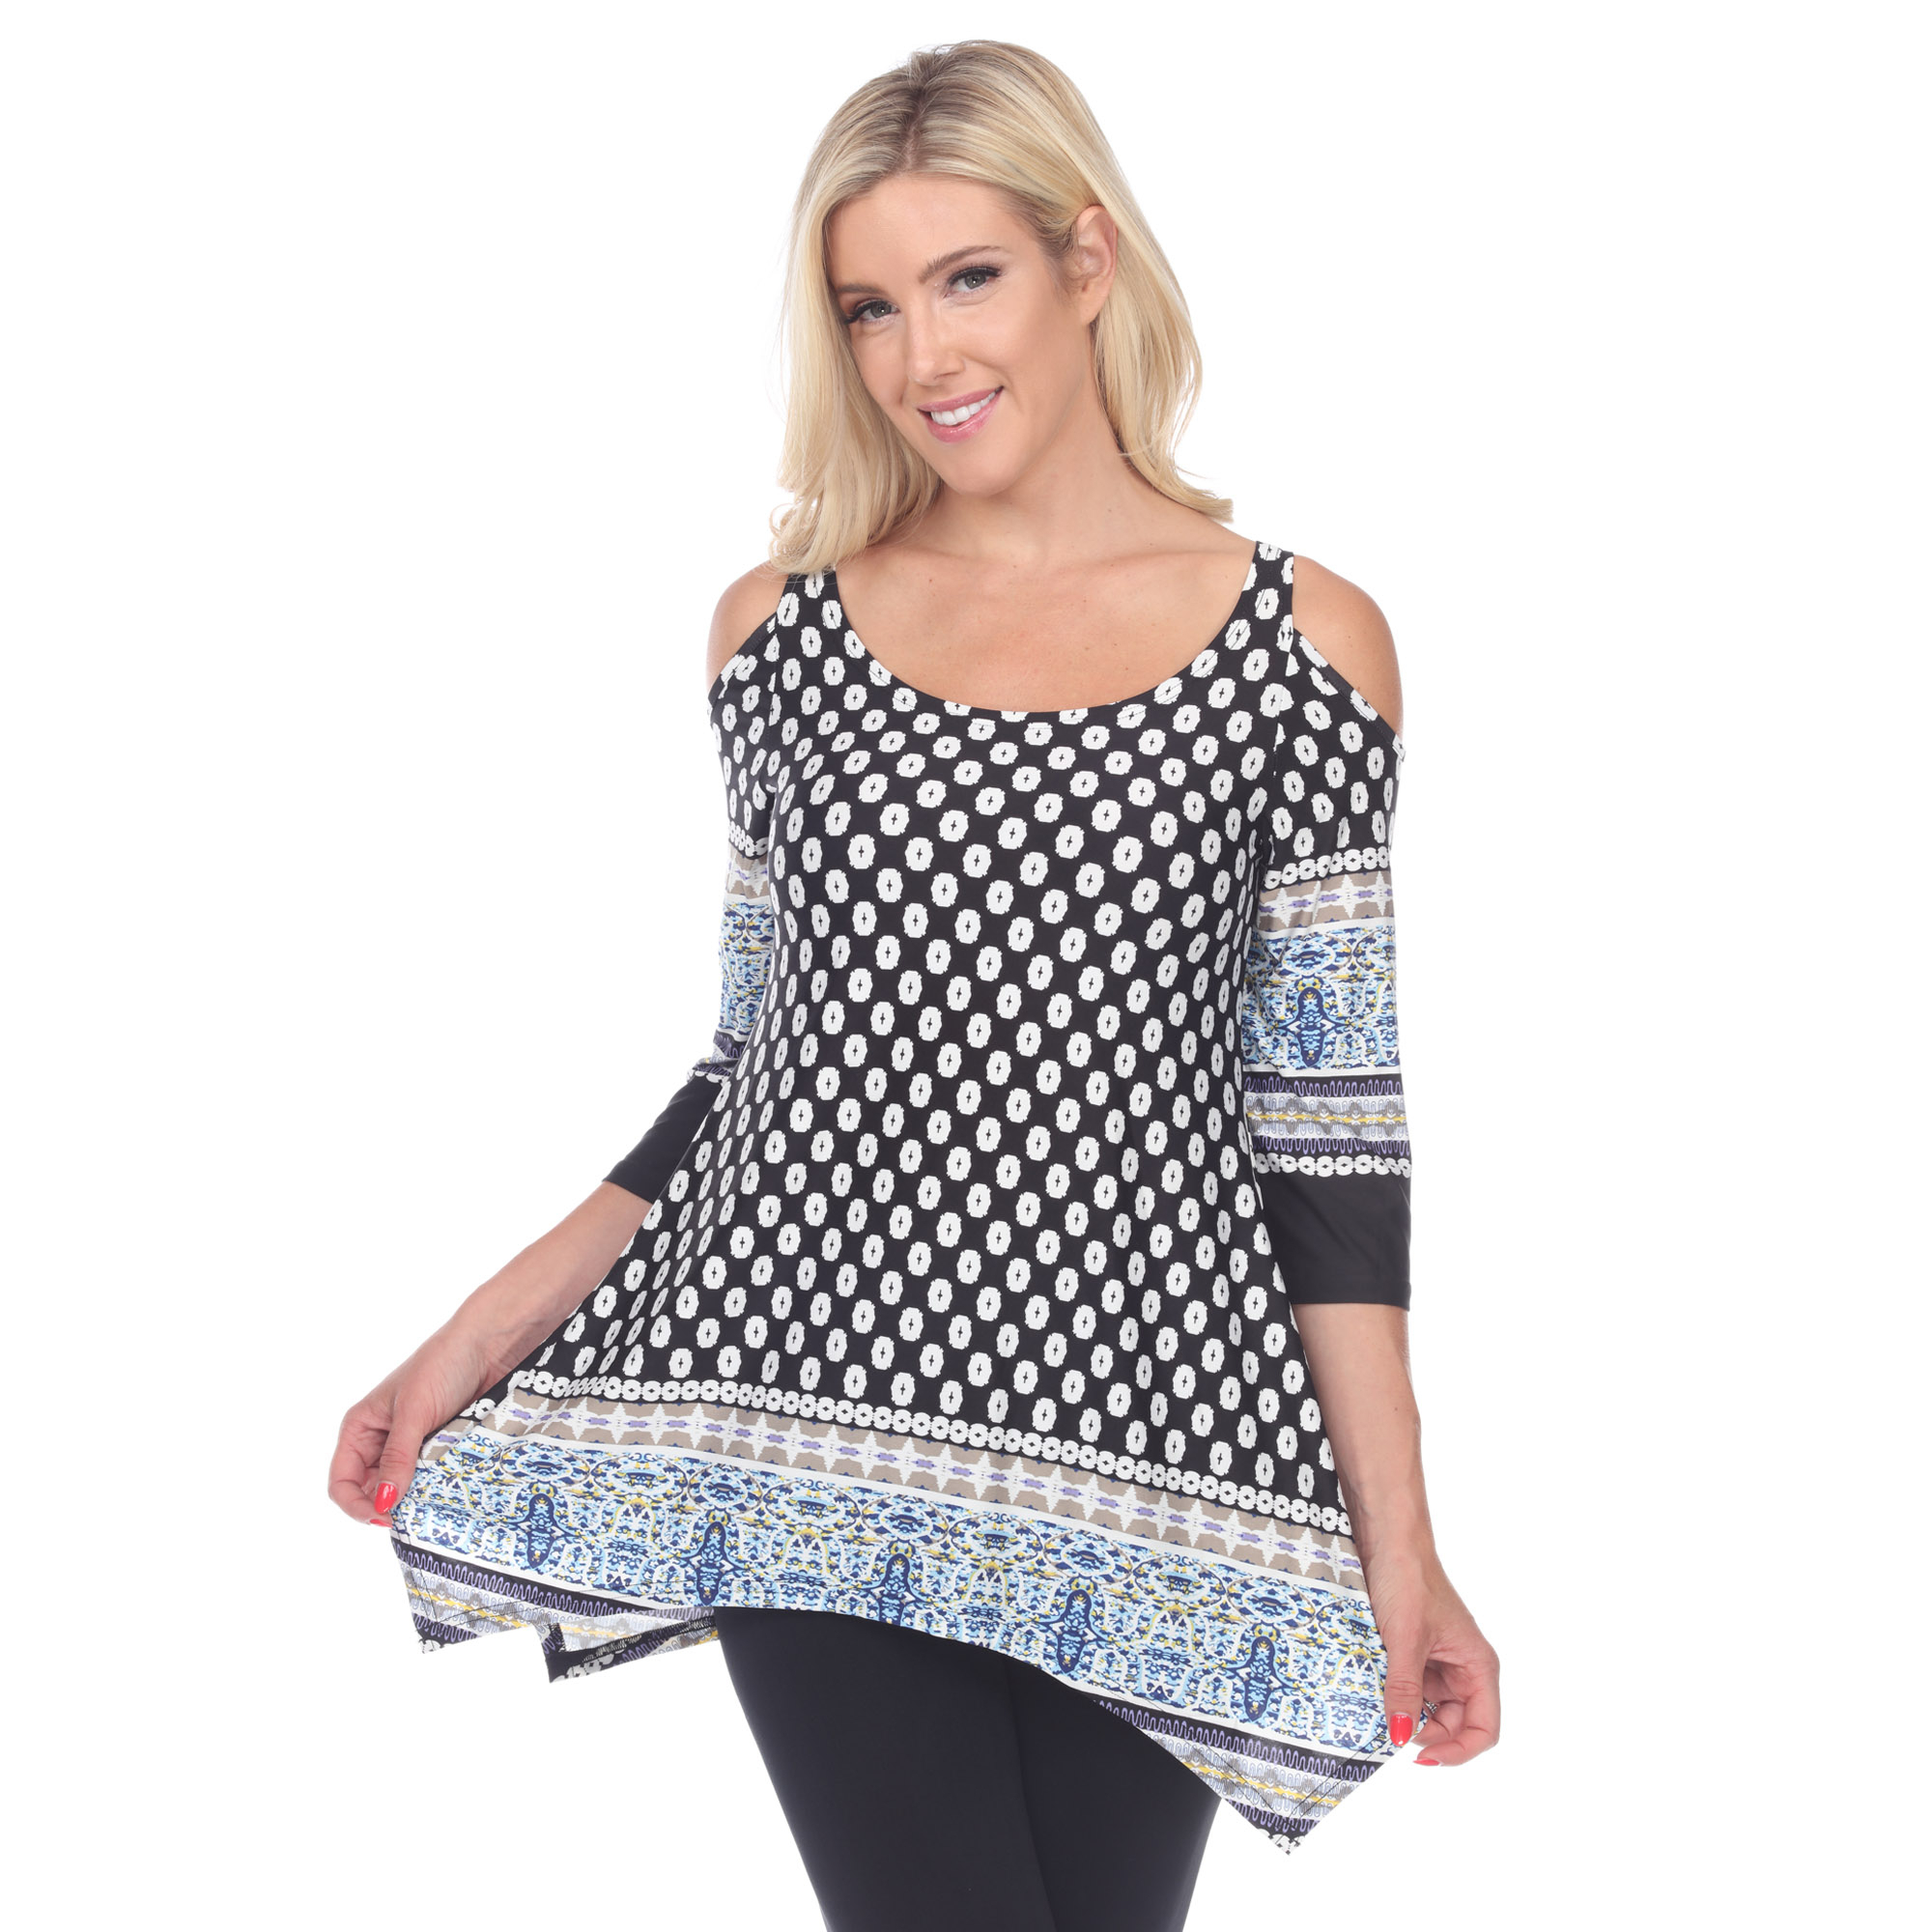 White Mark Women's Cold Shoulder Quarter Sleeve Printed Tunic Top With Pockets - Black/White Polka Dots, 3X